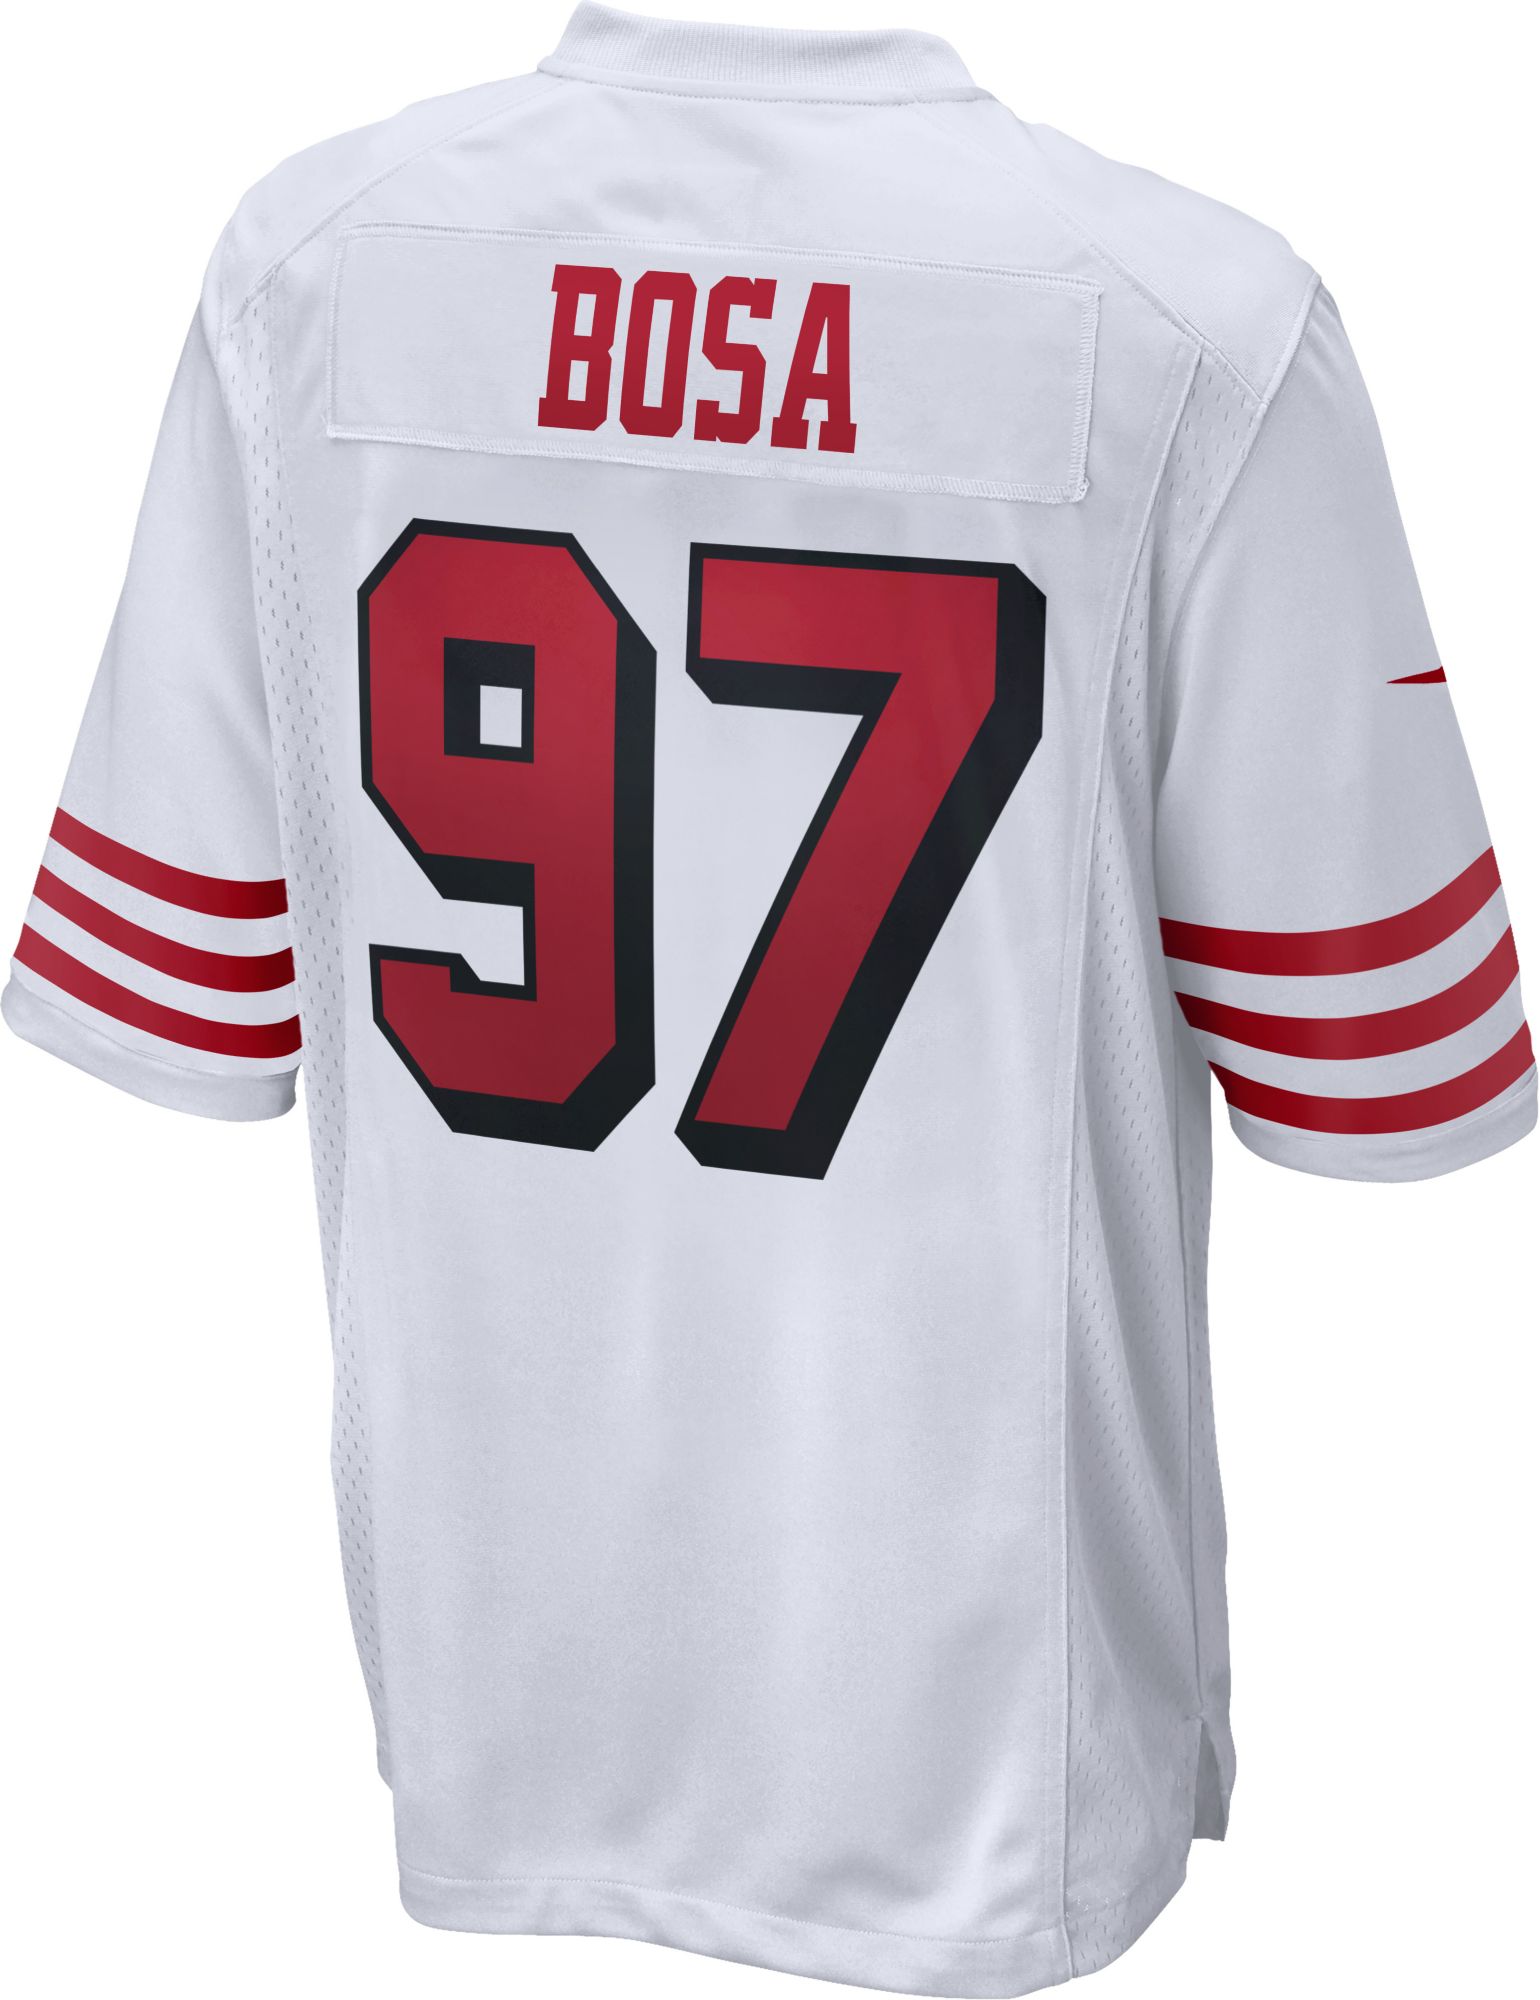 49ers jersey 97